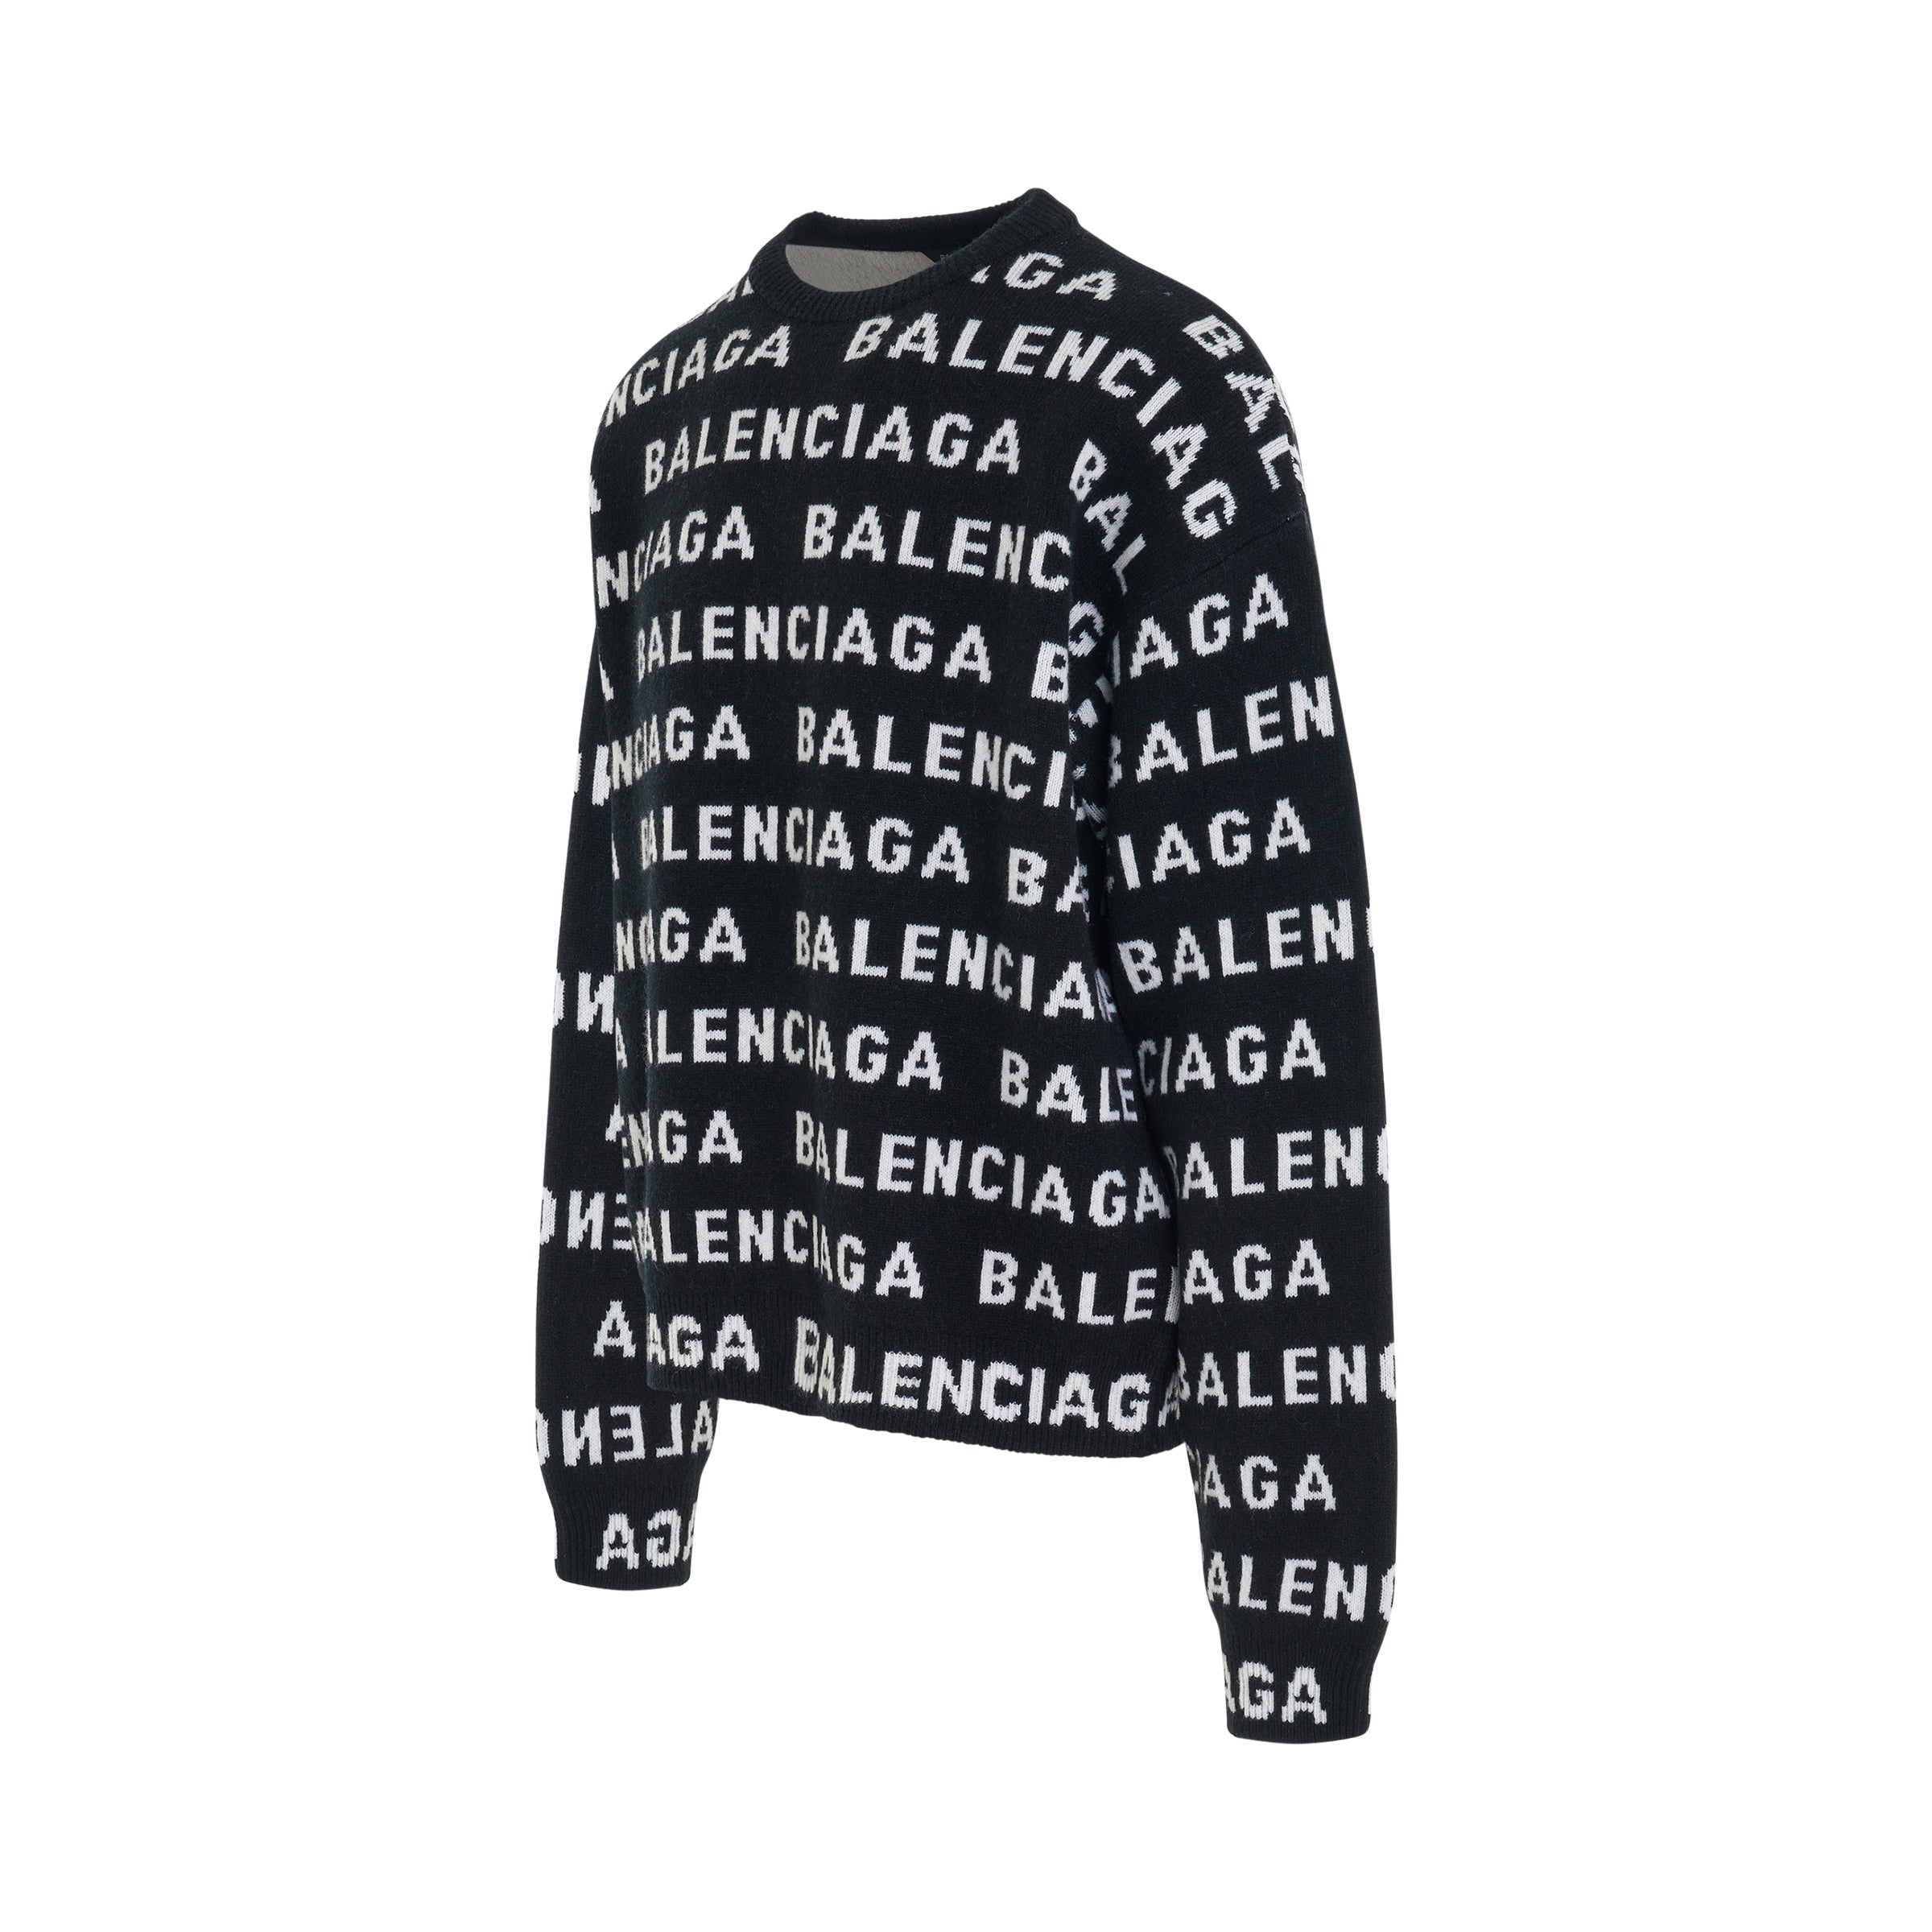 All-Over Logo Knit Sweater in Black/White - 2